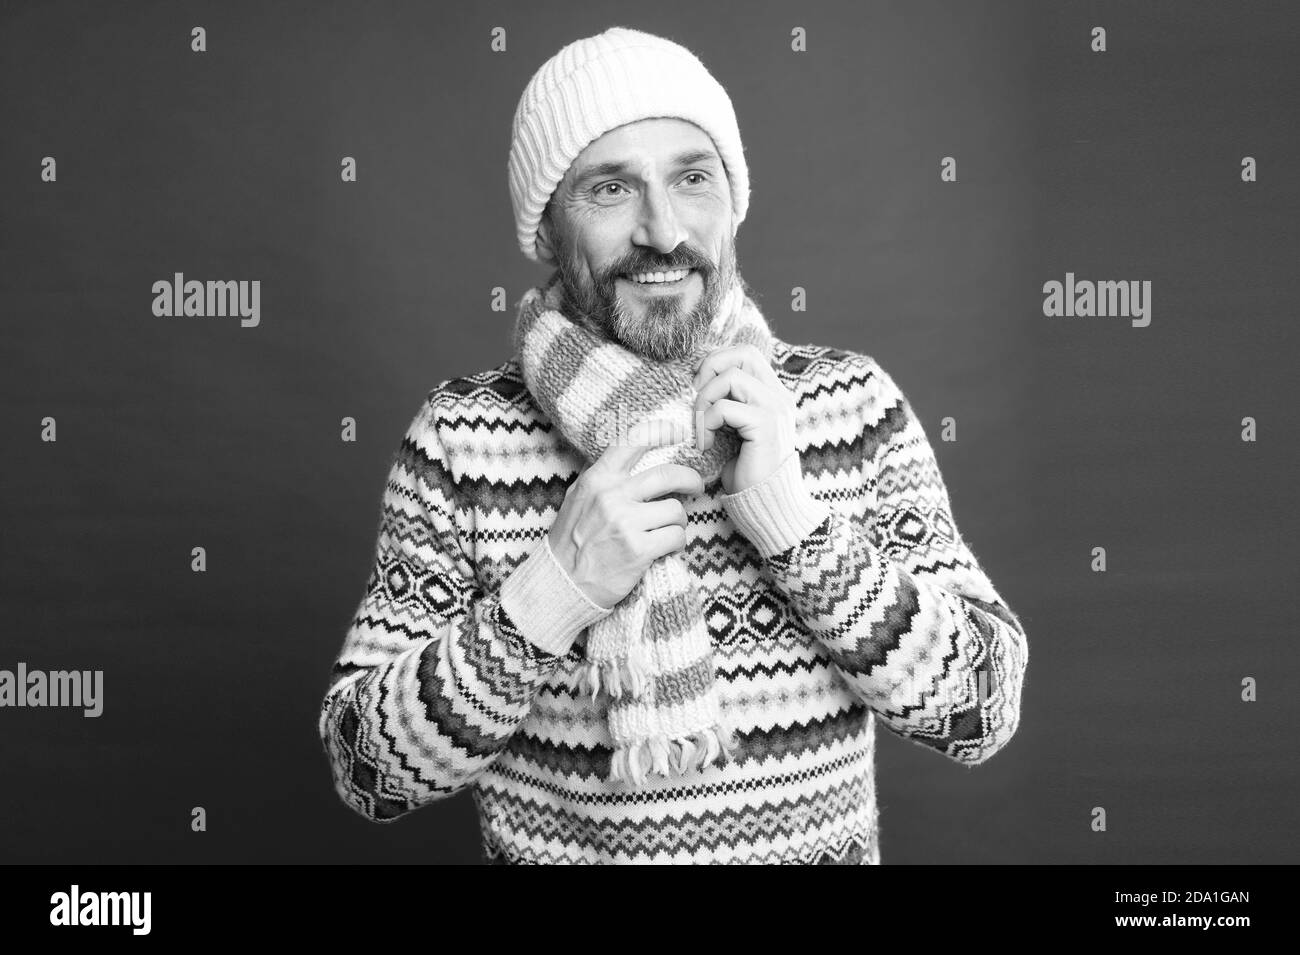 Dressing like man. Mature man red background. Bearded man in winter style. Caucasian man wear warm clothes. Fashion and style. Winter trends. Stock Photo